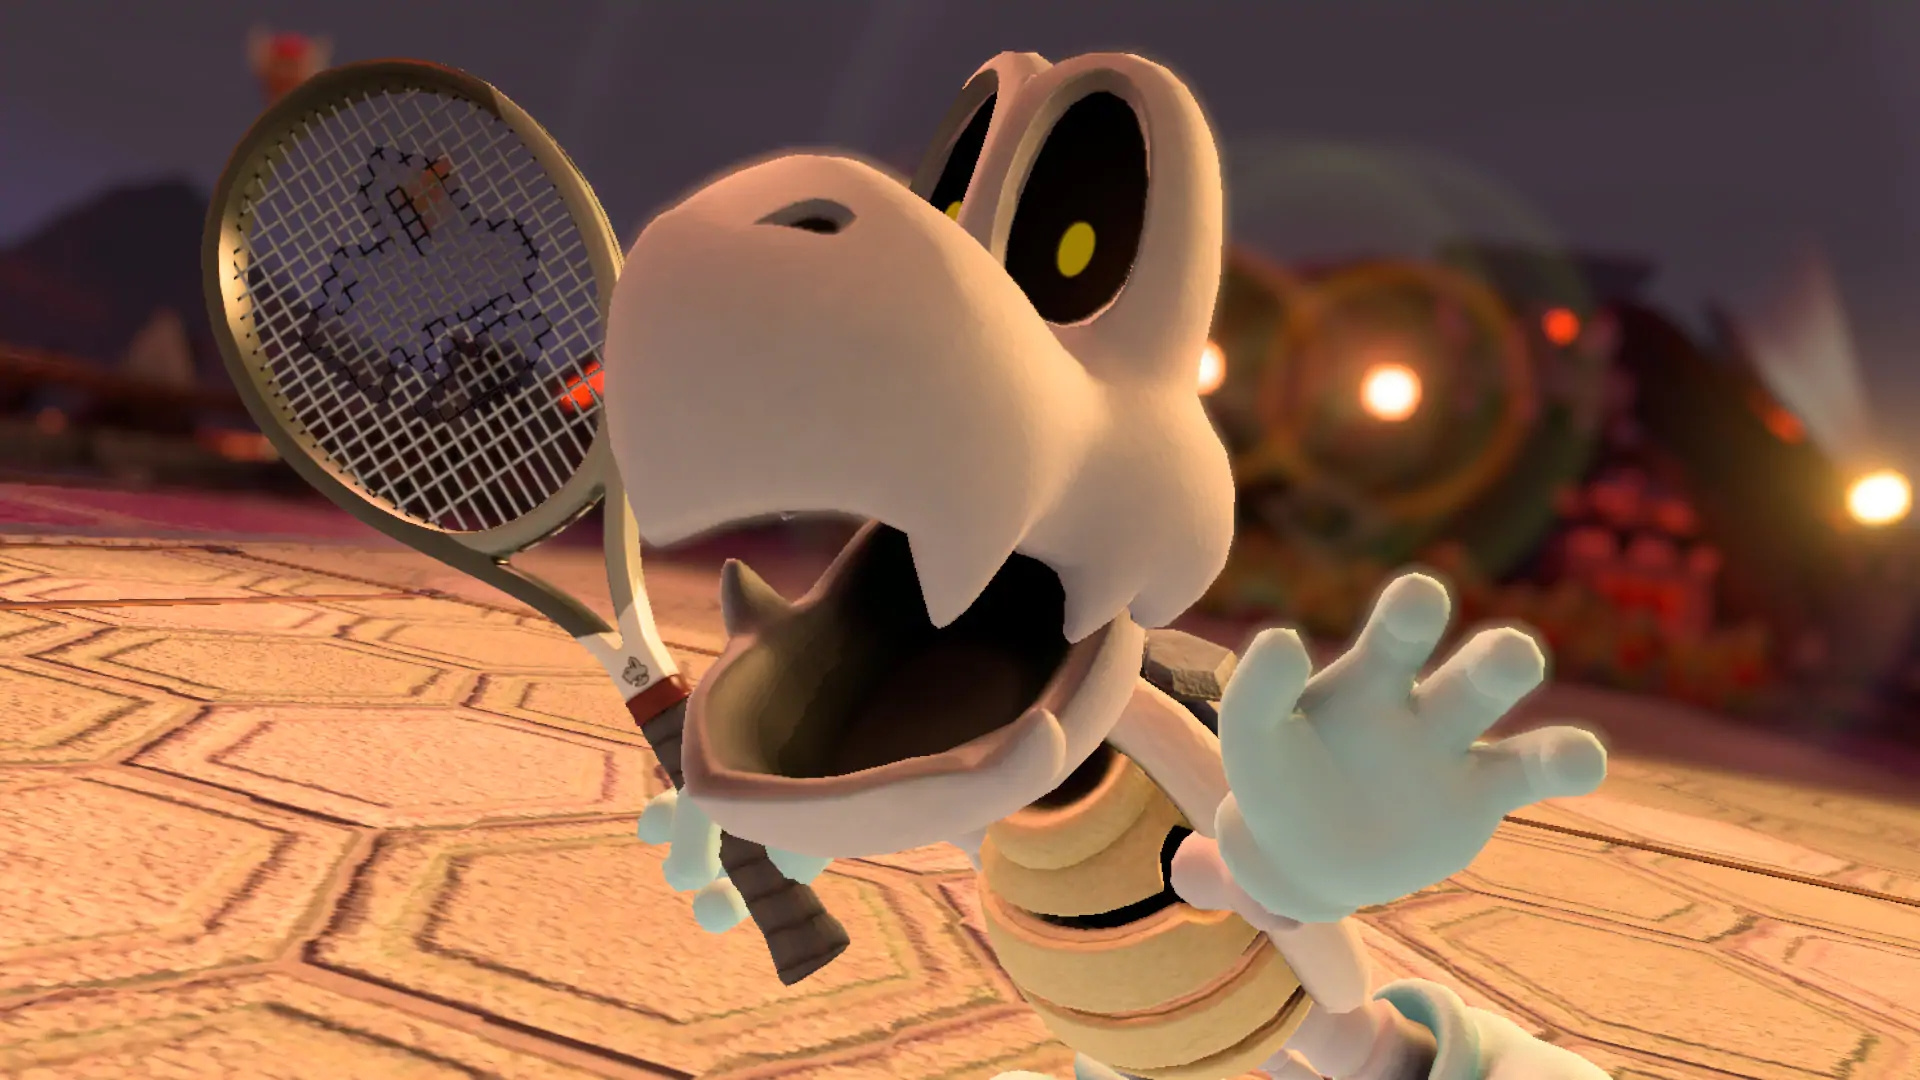 Video: Dry Bones Joins The Mario Tennis Aces Roster In May - Nintendo Life